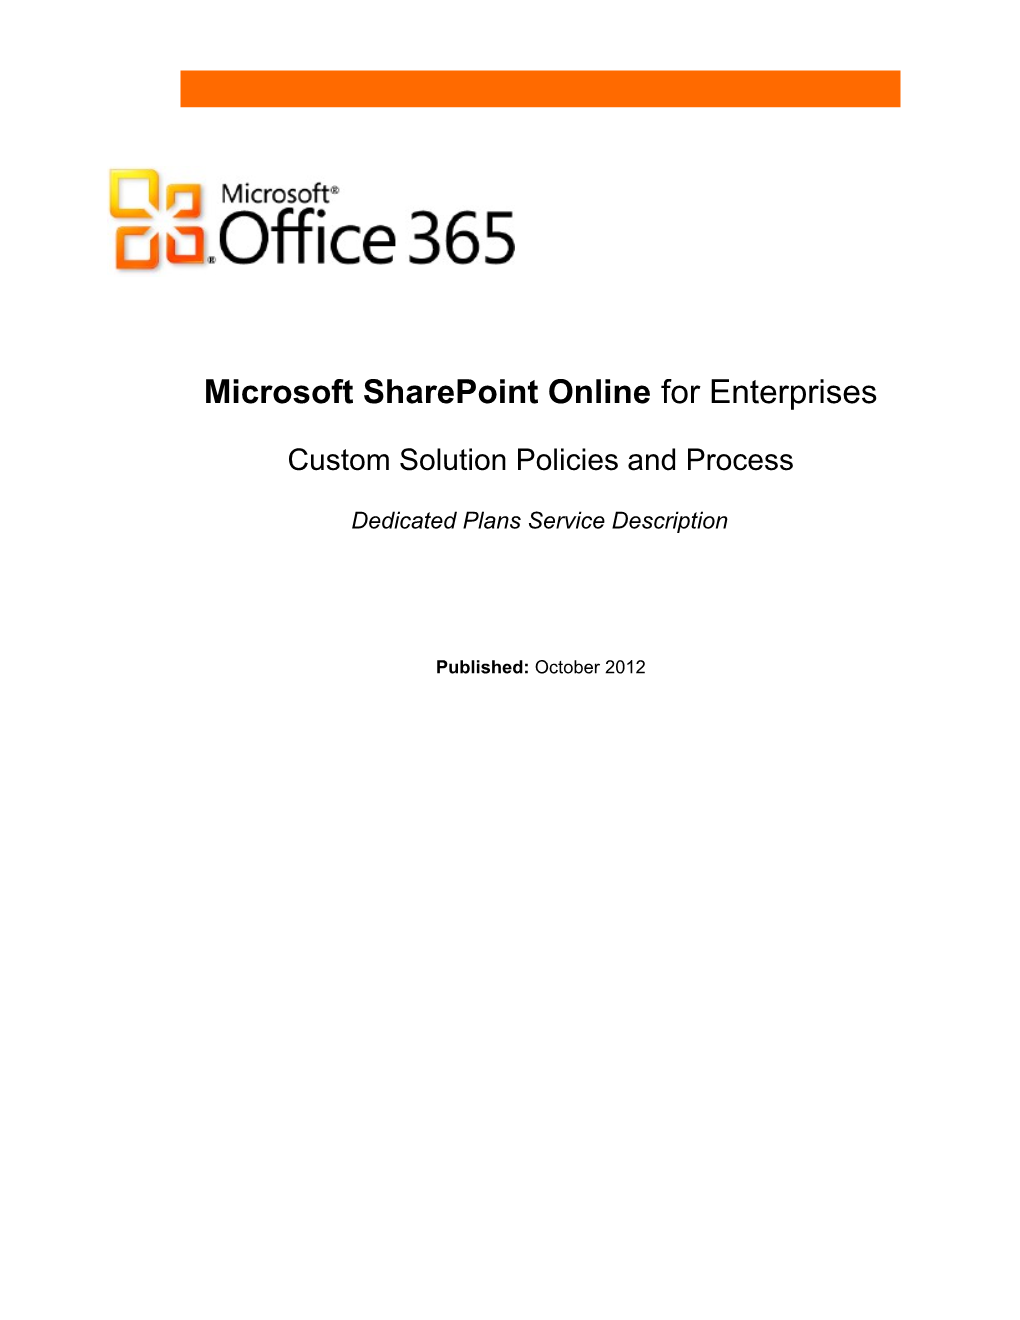 Sharepoint Online Custom Solution Policies and Process - October 2012